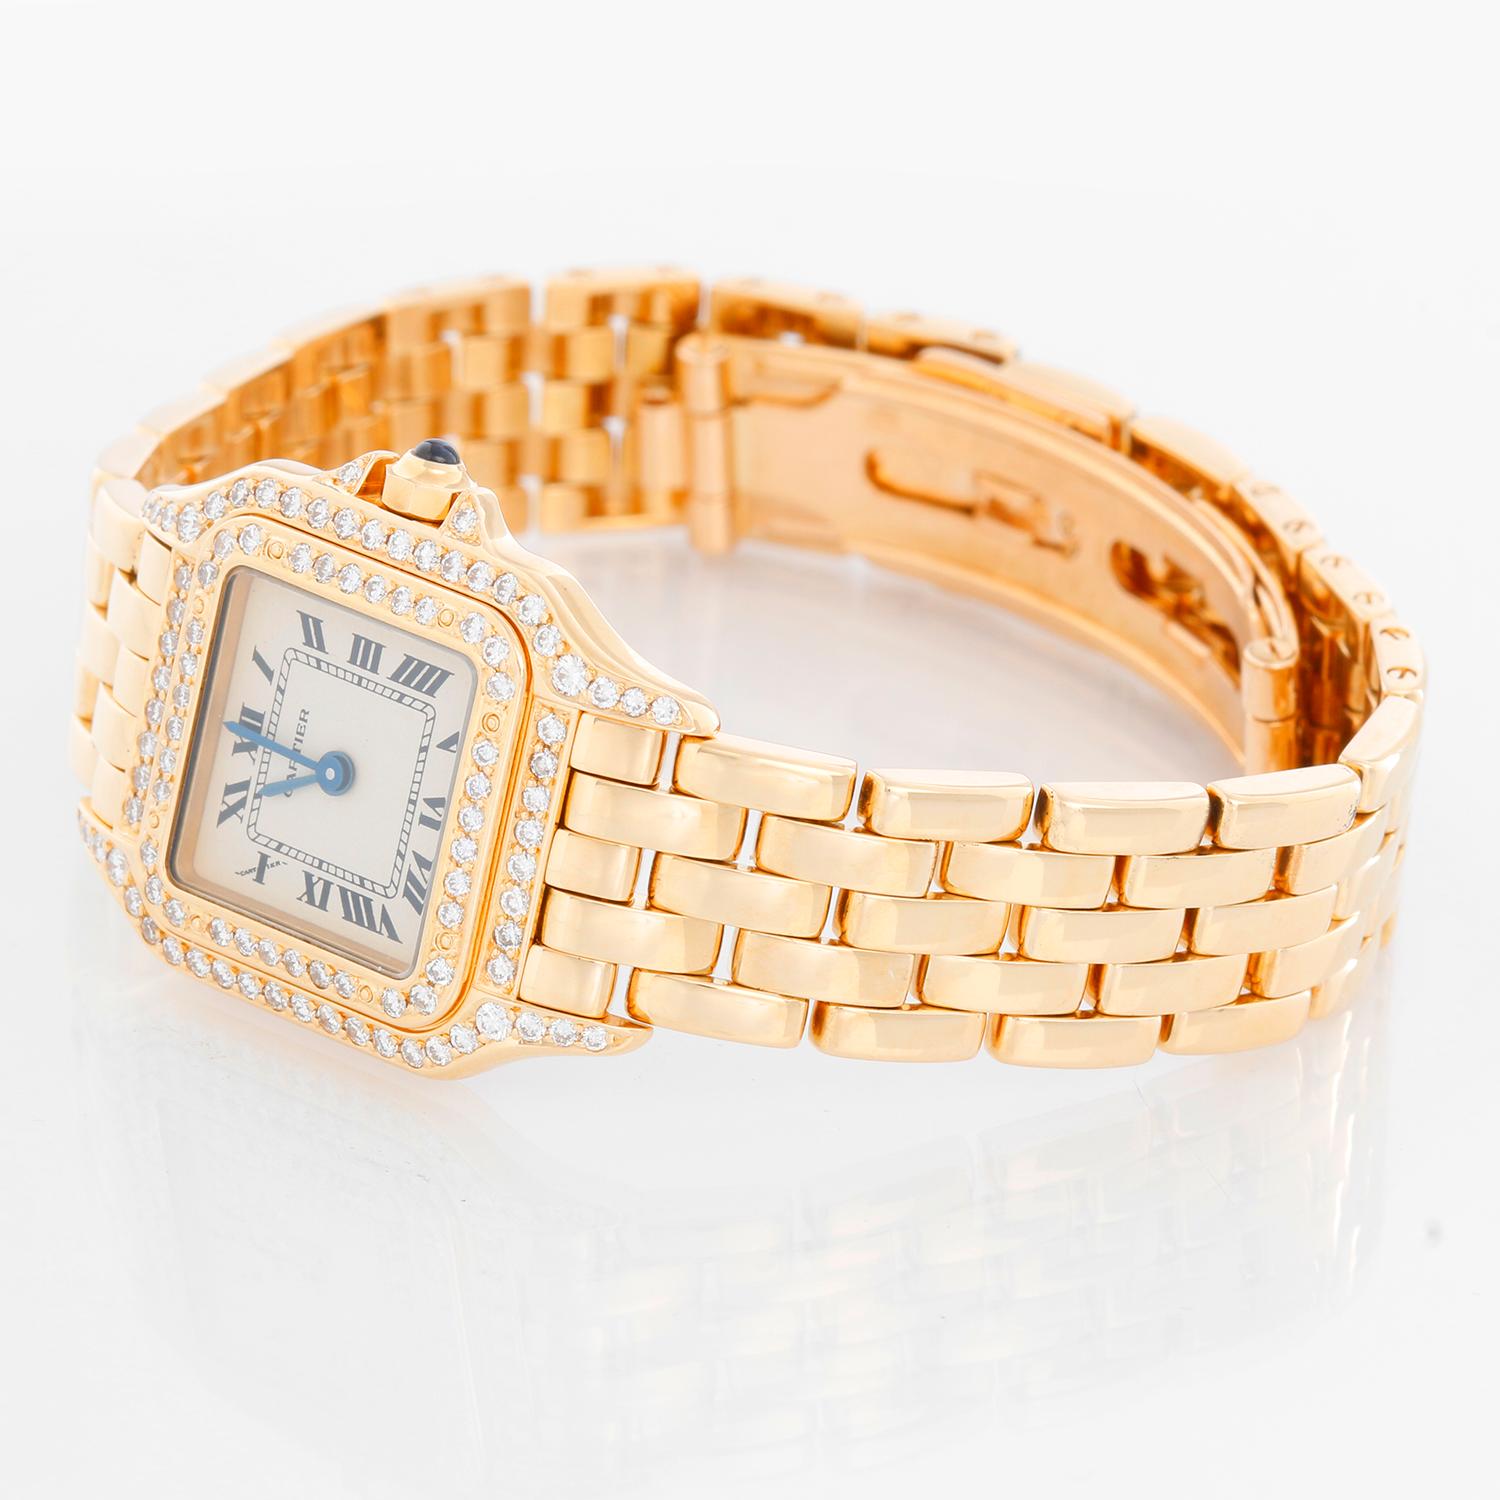 Cartier 18K Yellow Gold Panther Ladies Watch WF3254B9 1280 - Quartz. 18K Yellow Gold with diamonds (22 x 30mm) ; Diamond bezel and lugs. Ivory dial with black Roman numerals. 18K Yellow Gold Panther bracelet with deployant buckle. Pre-owned with